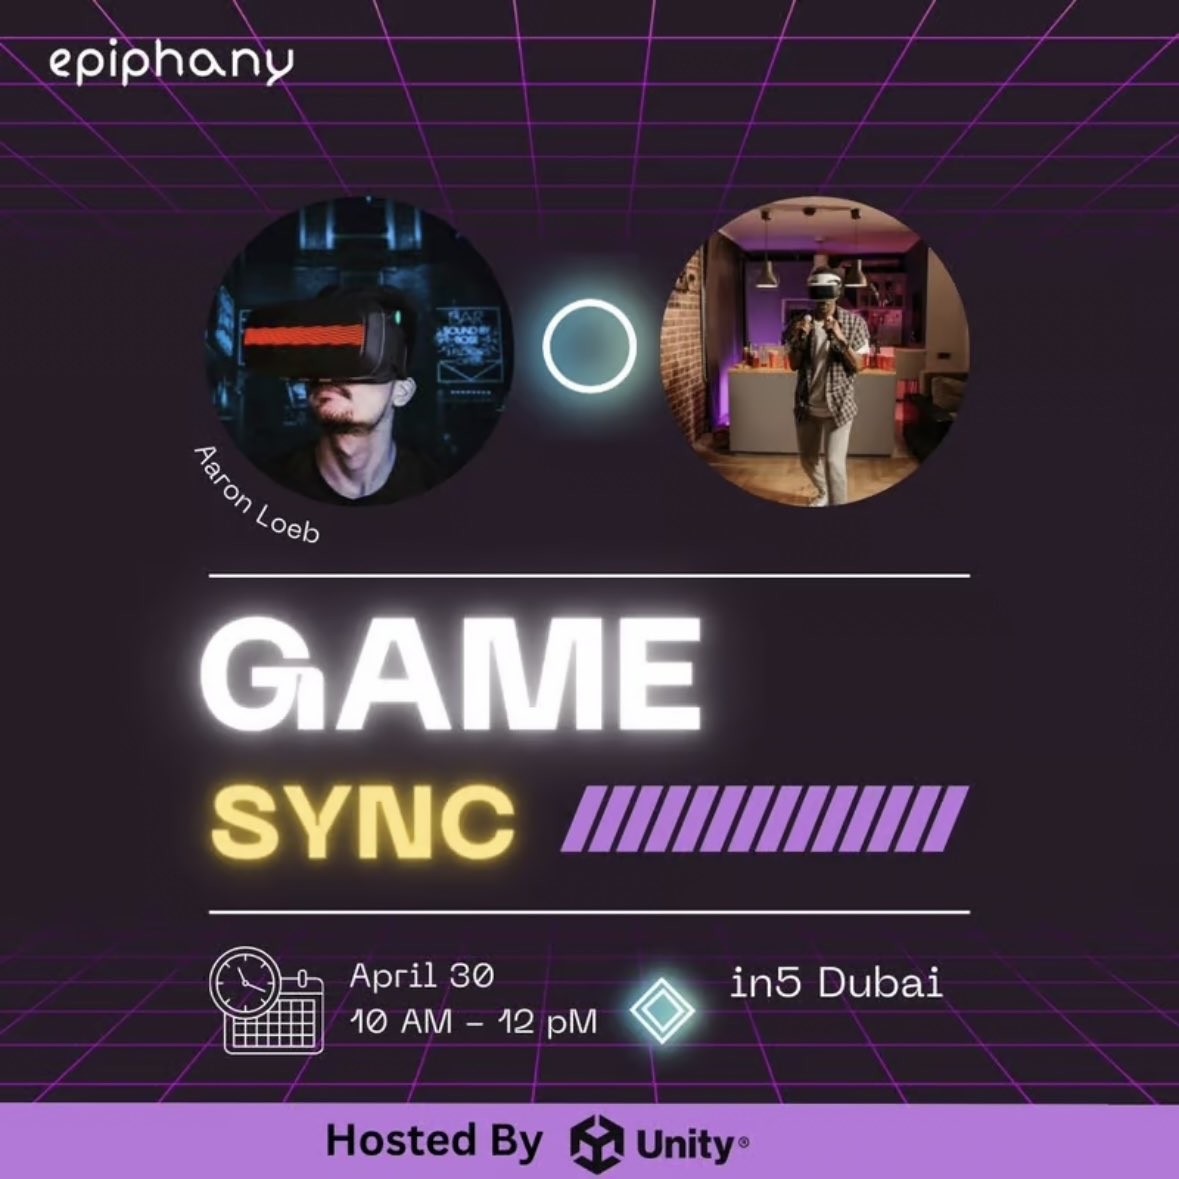 I’m in #Dubai for the next few days for a few events hosted by @Unity!
If you’re in town tomorrow, sign up for #GameSync at the #In5TechIncubator:

lu.ma/o61on330 #In5Dubai